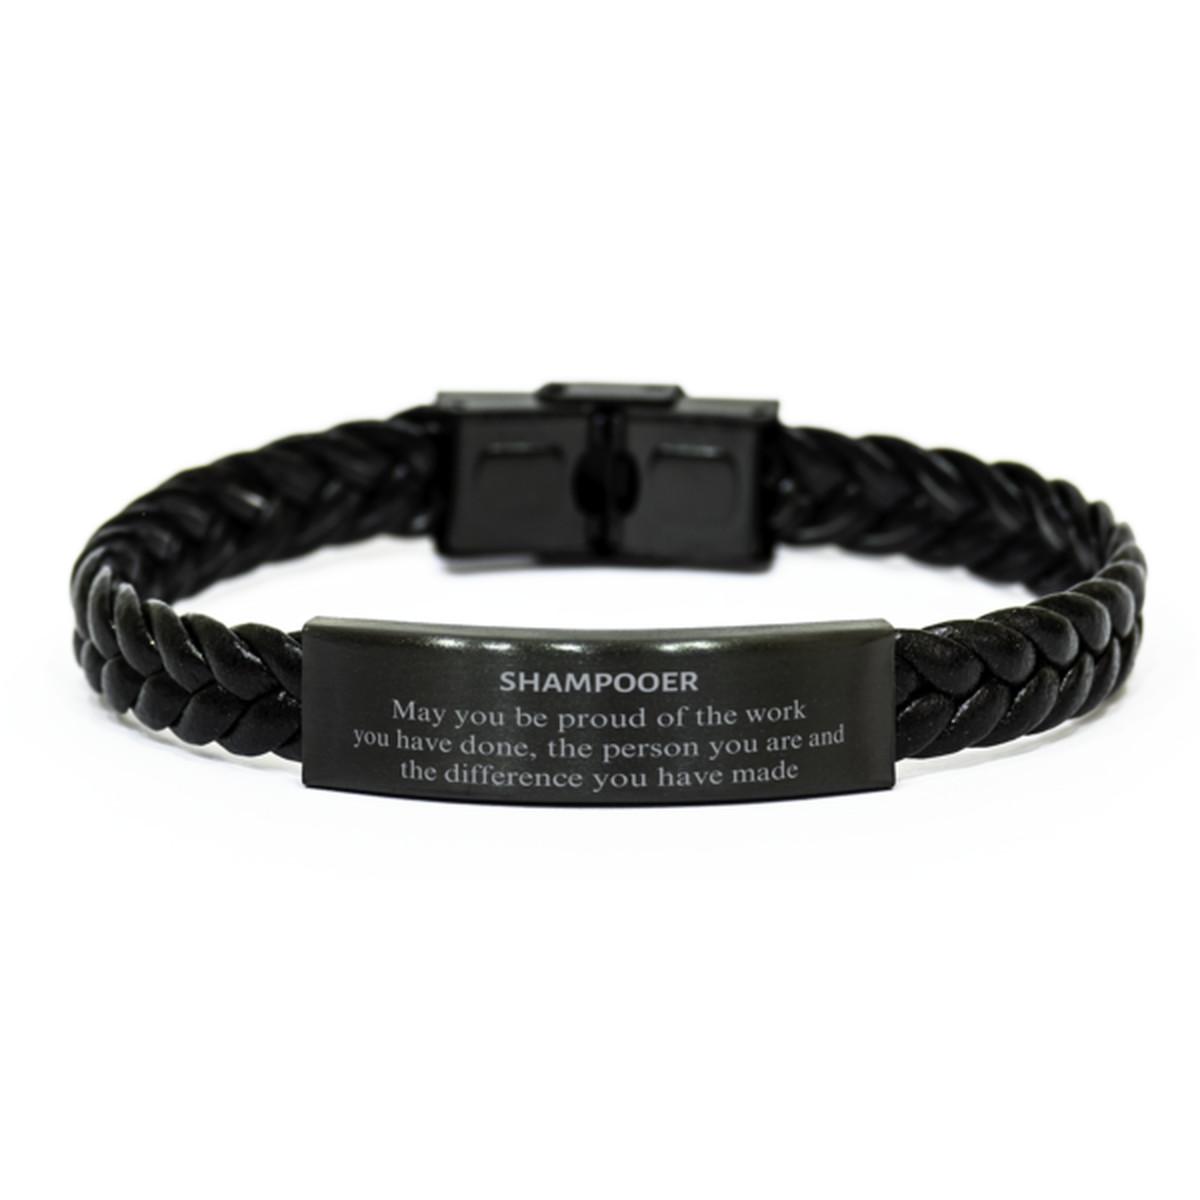 Shampooer May you be proud of the work you have done, Retirement Shampooer Braided Leather Bracelet for Colleague Appreciation Gifts Amazing for Shampooer